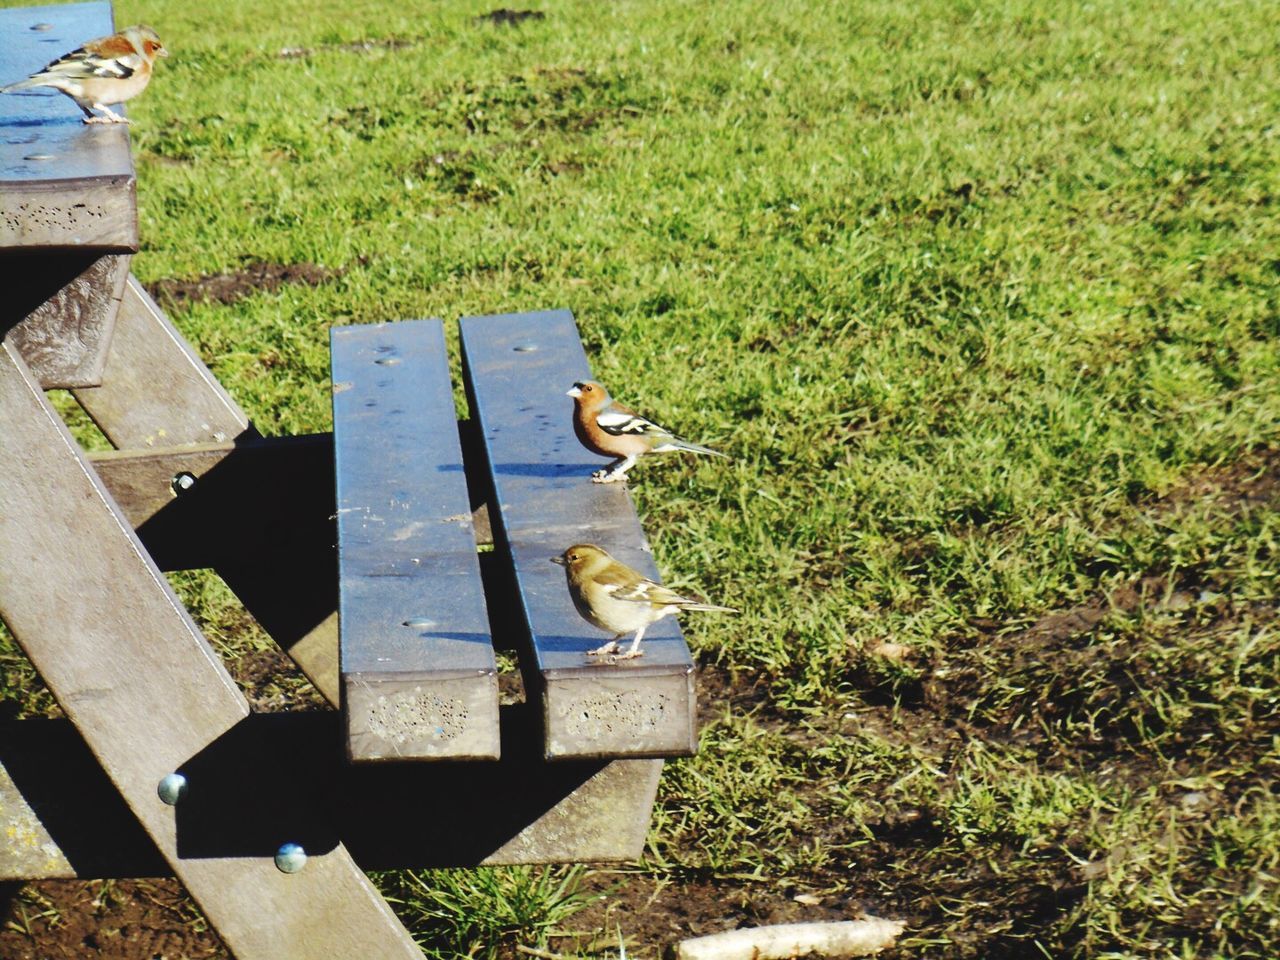 Birds perching on picnic table at field during sunny day